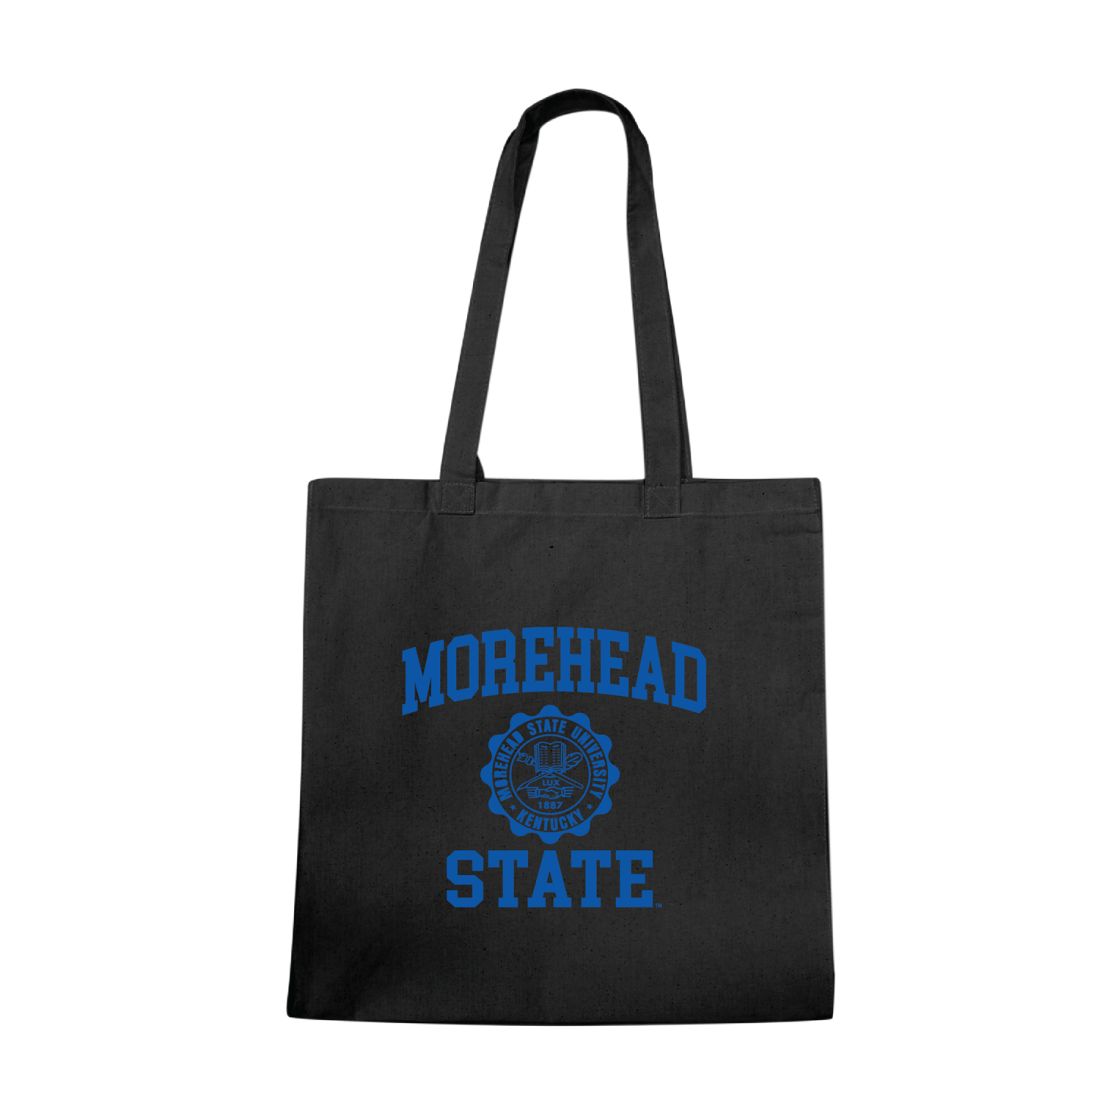 MSU Morehead State University Eagles Institutional Seal Tote Bag